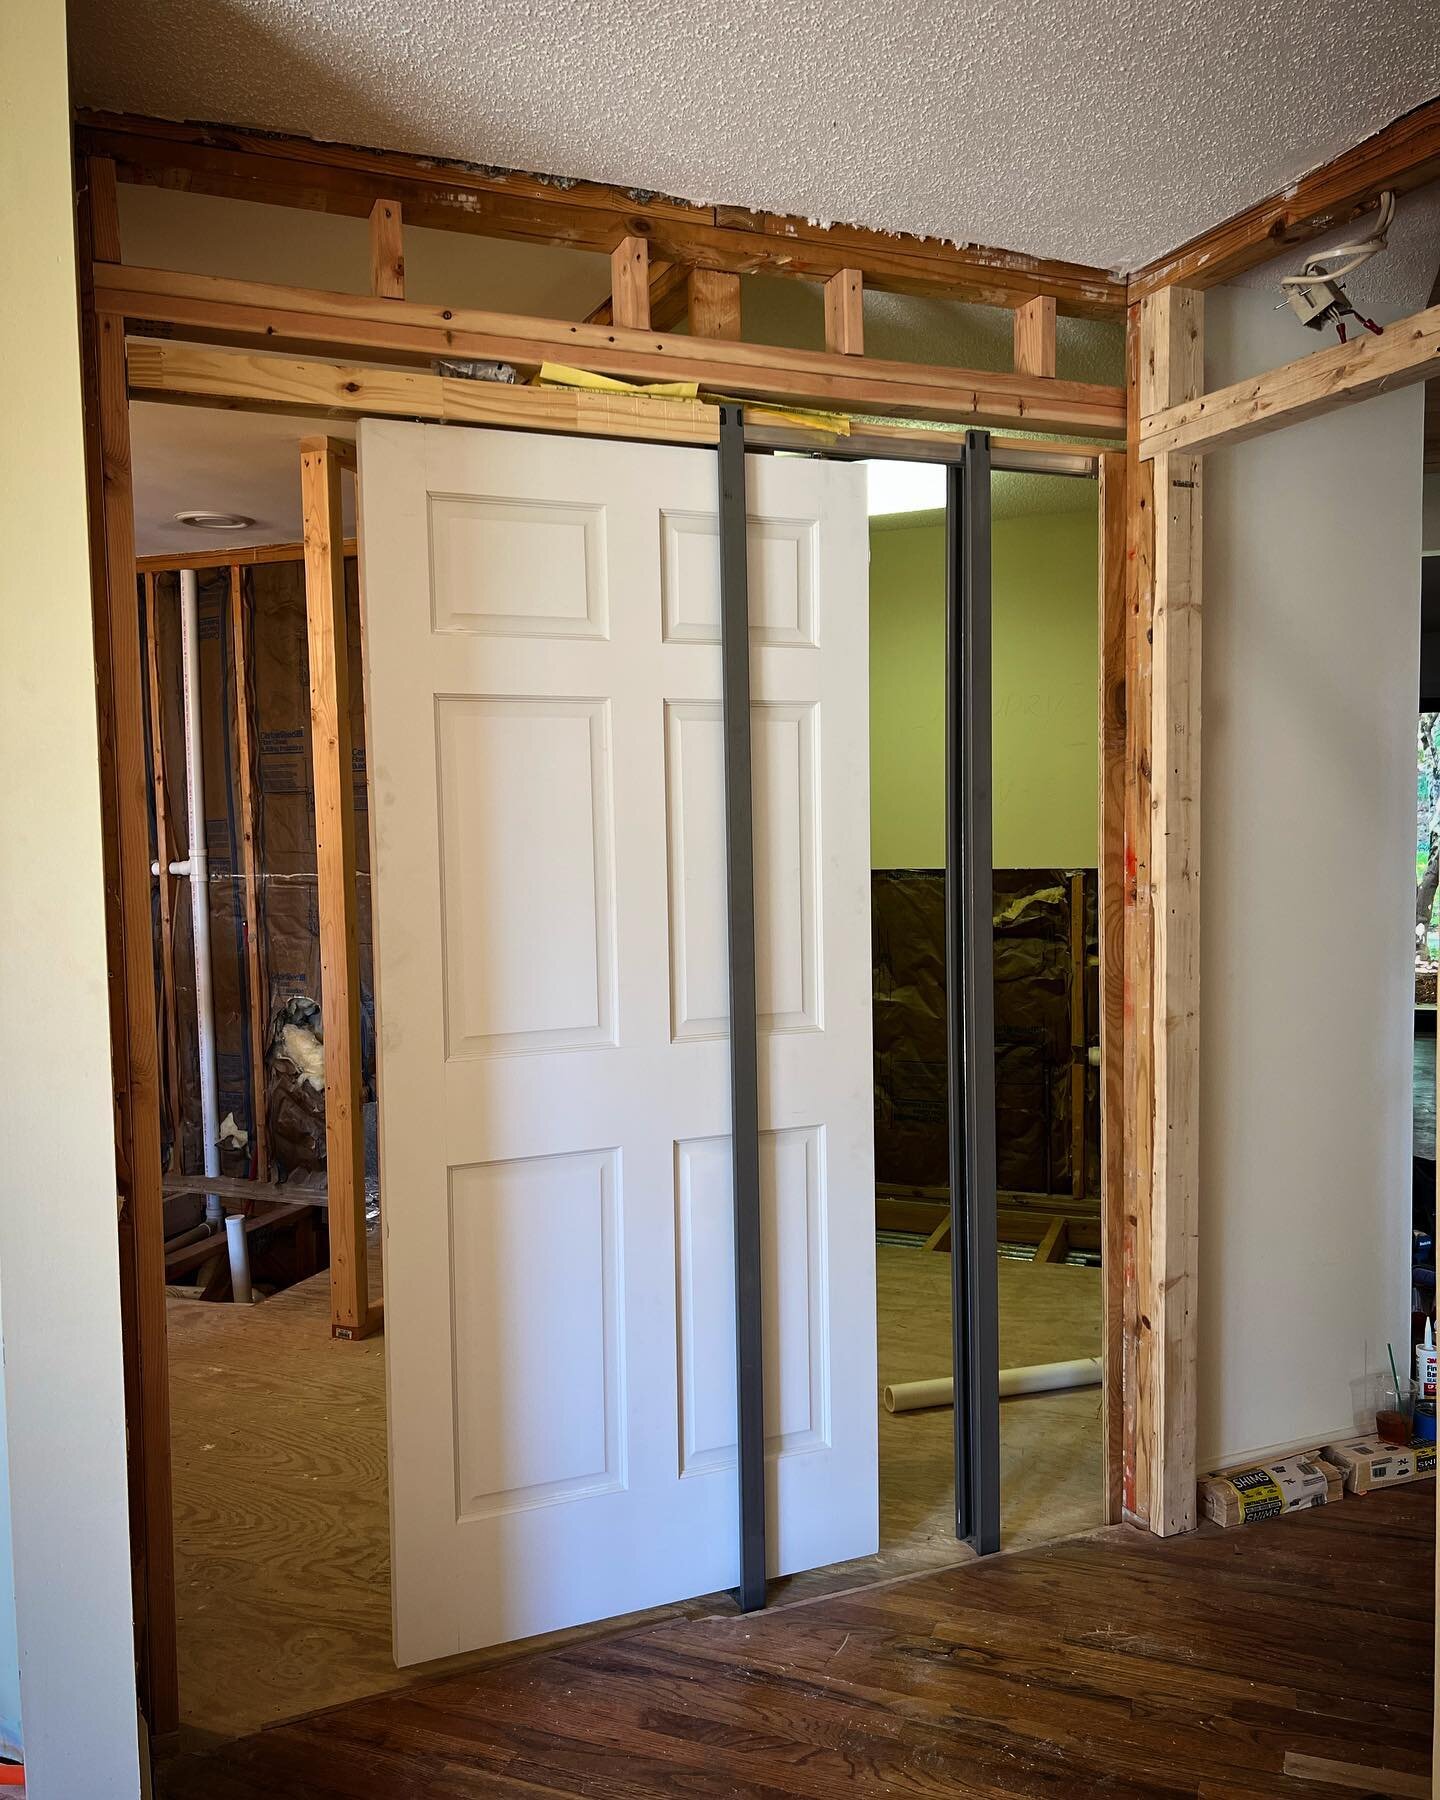 Inside Matters

Stout, strong, sturdy, door weight rated, engineered to last with a sweet soft close mechanism; far from 80&rsquo;s construction and superior to cheap big-box pocket door kits. 

Thank you to our local suppliers and @johnsonhardware 
